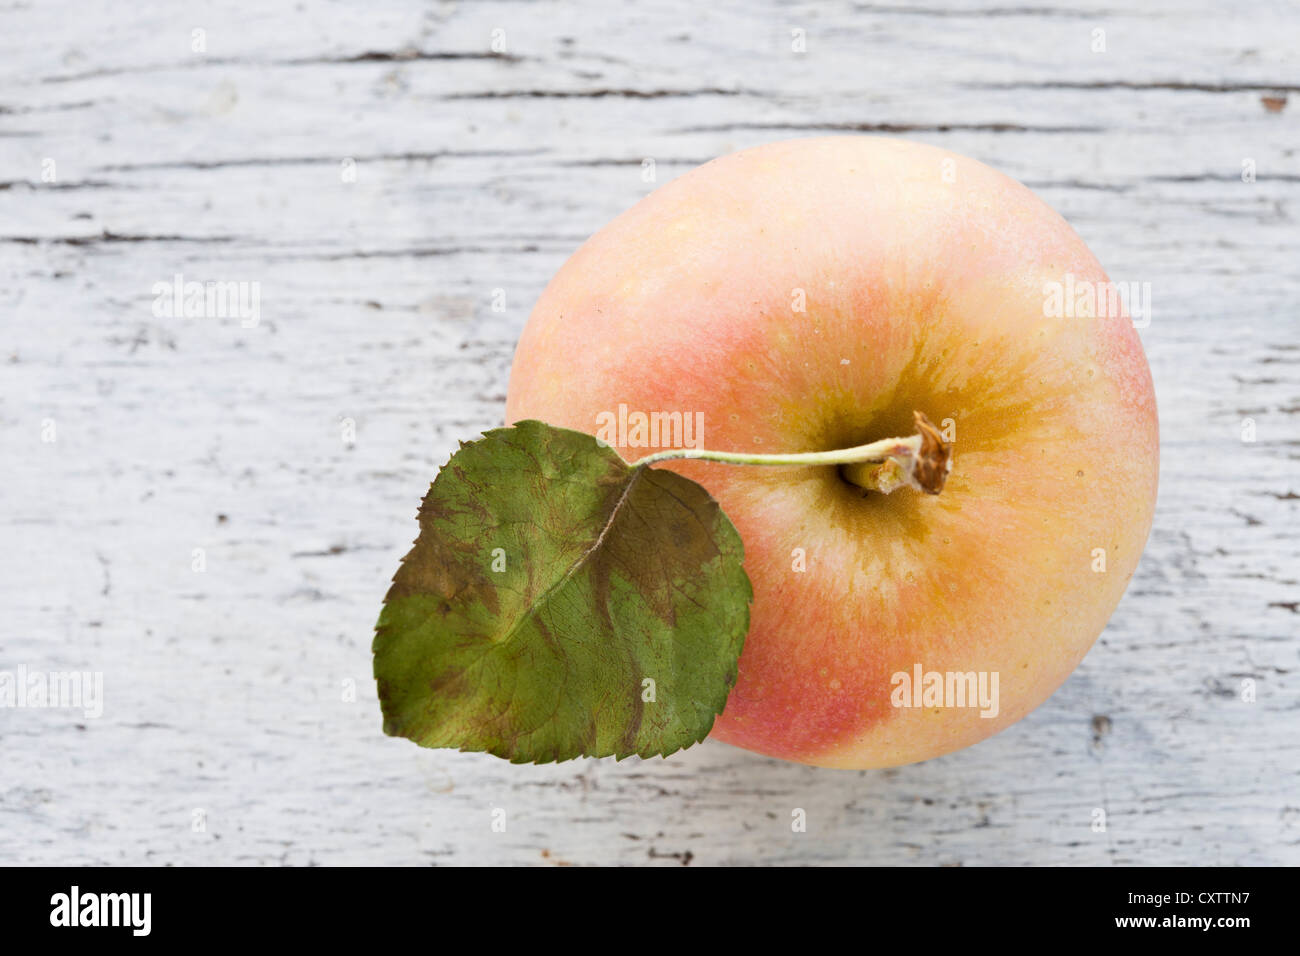 apple gala two color fresh with leaf on country table Stock Photo